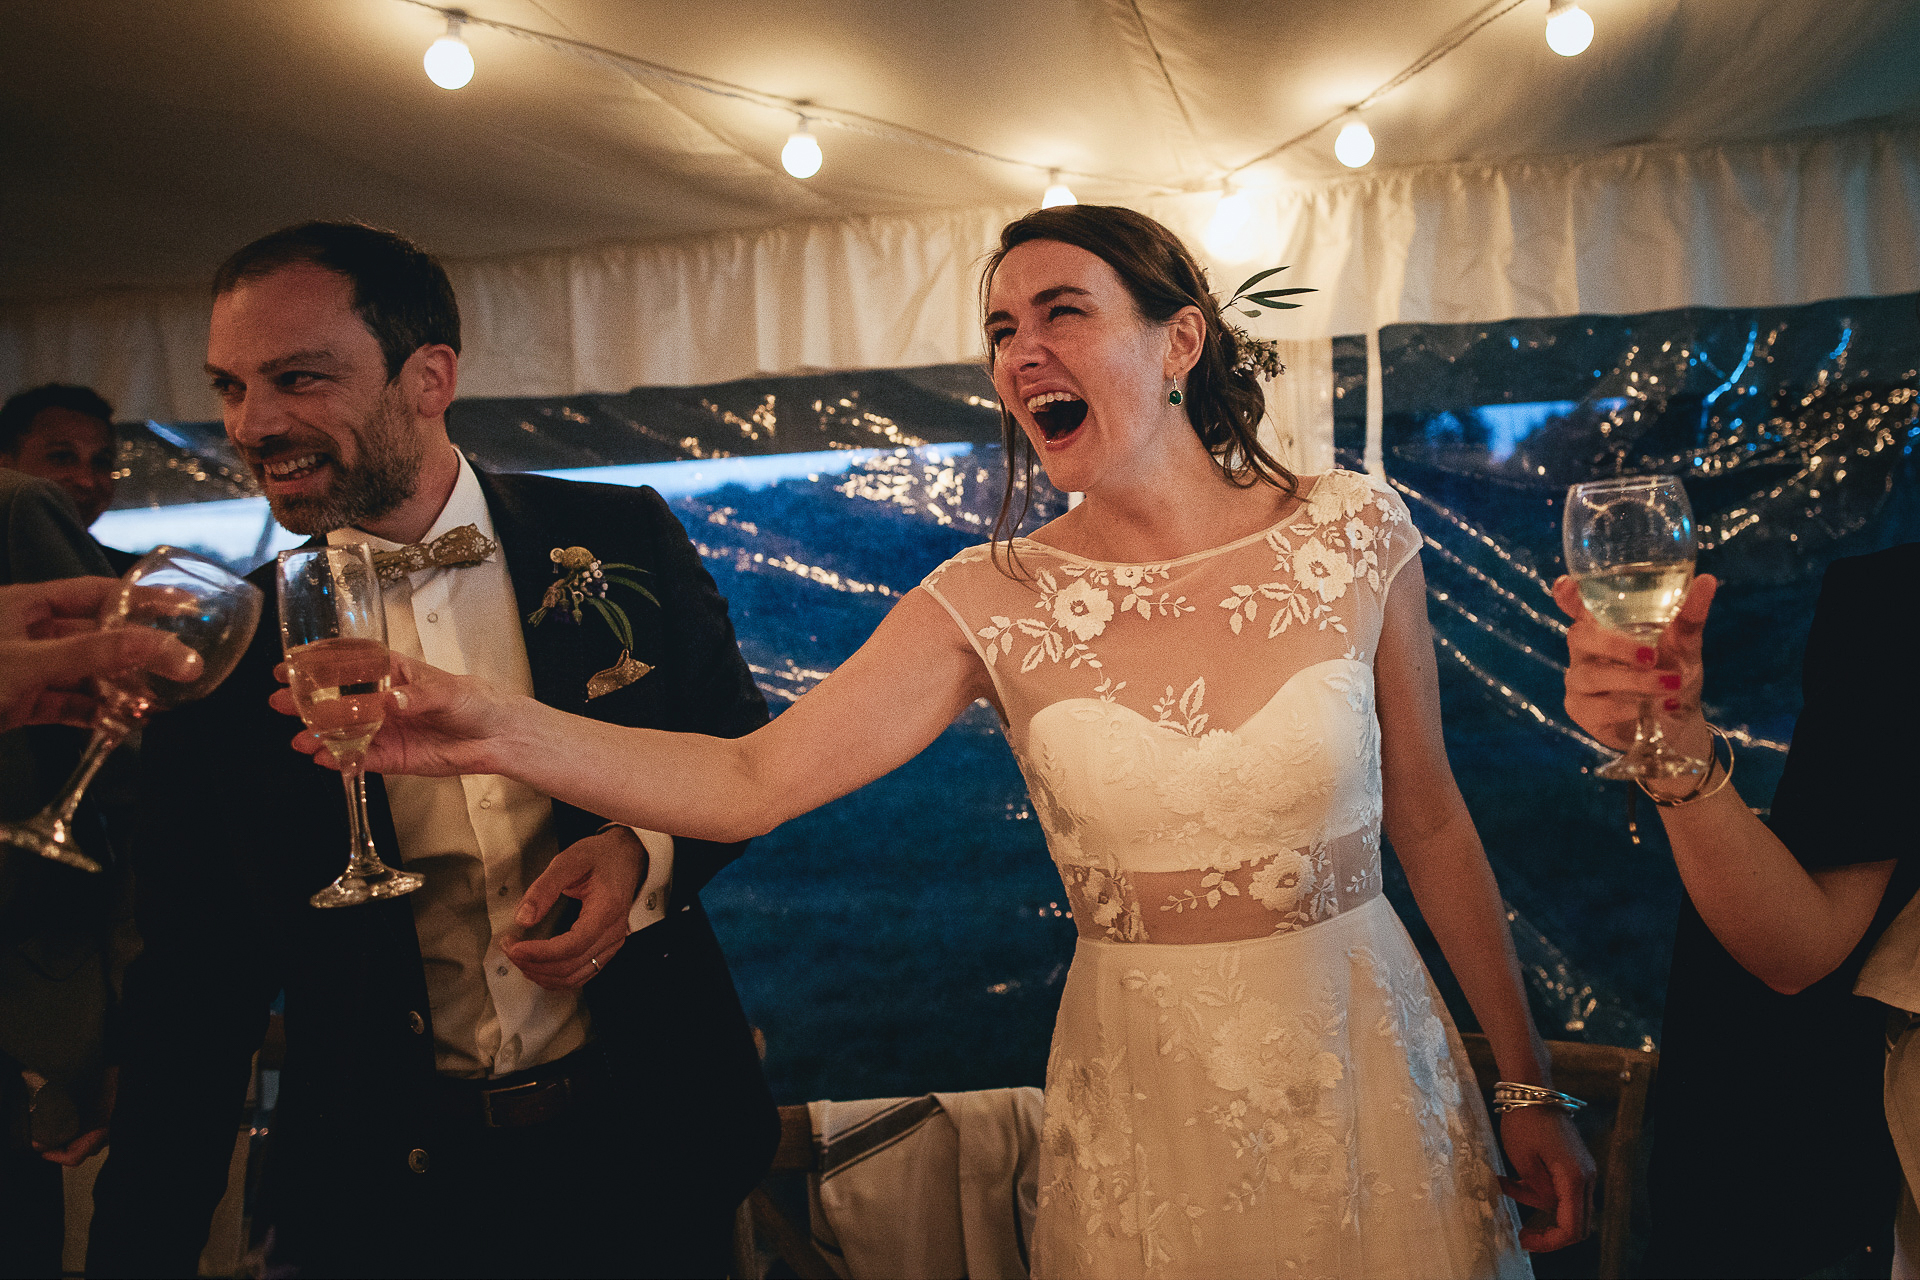 Bride and groom toasting happily in a marquee